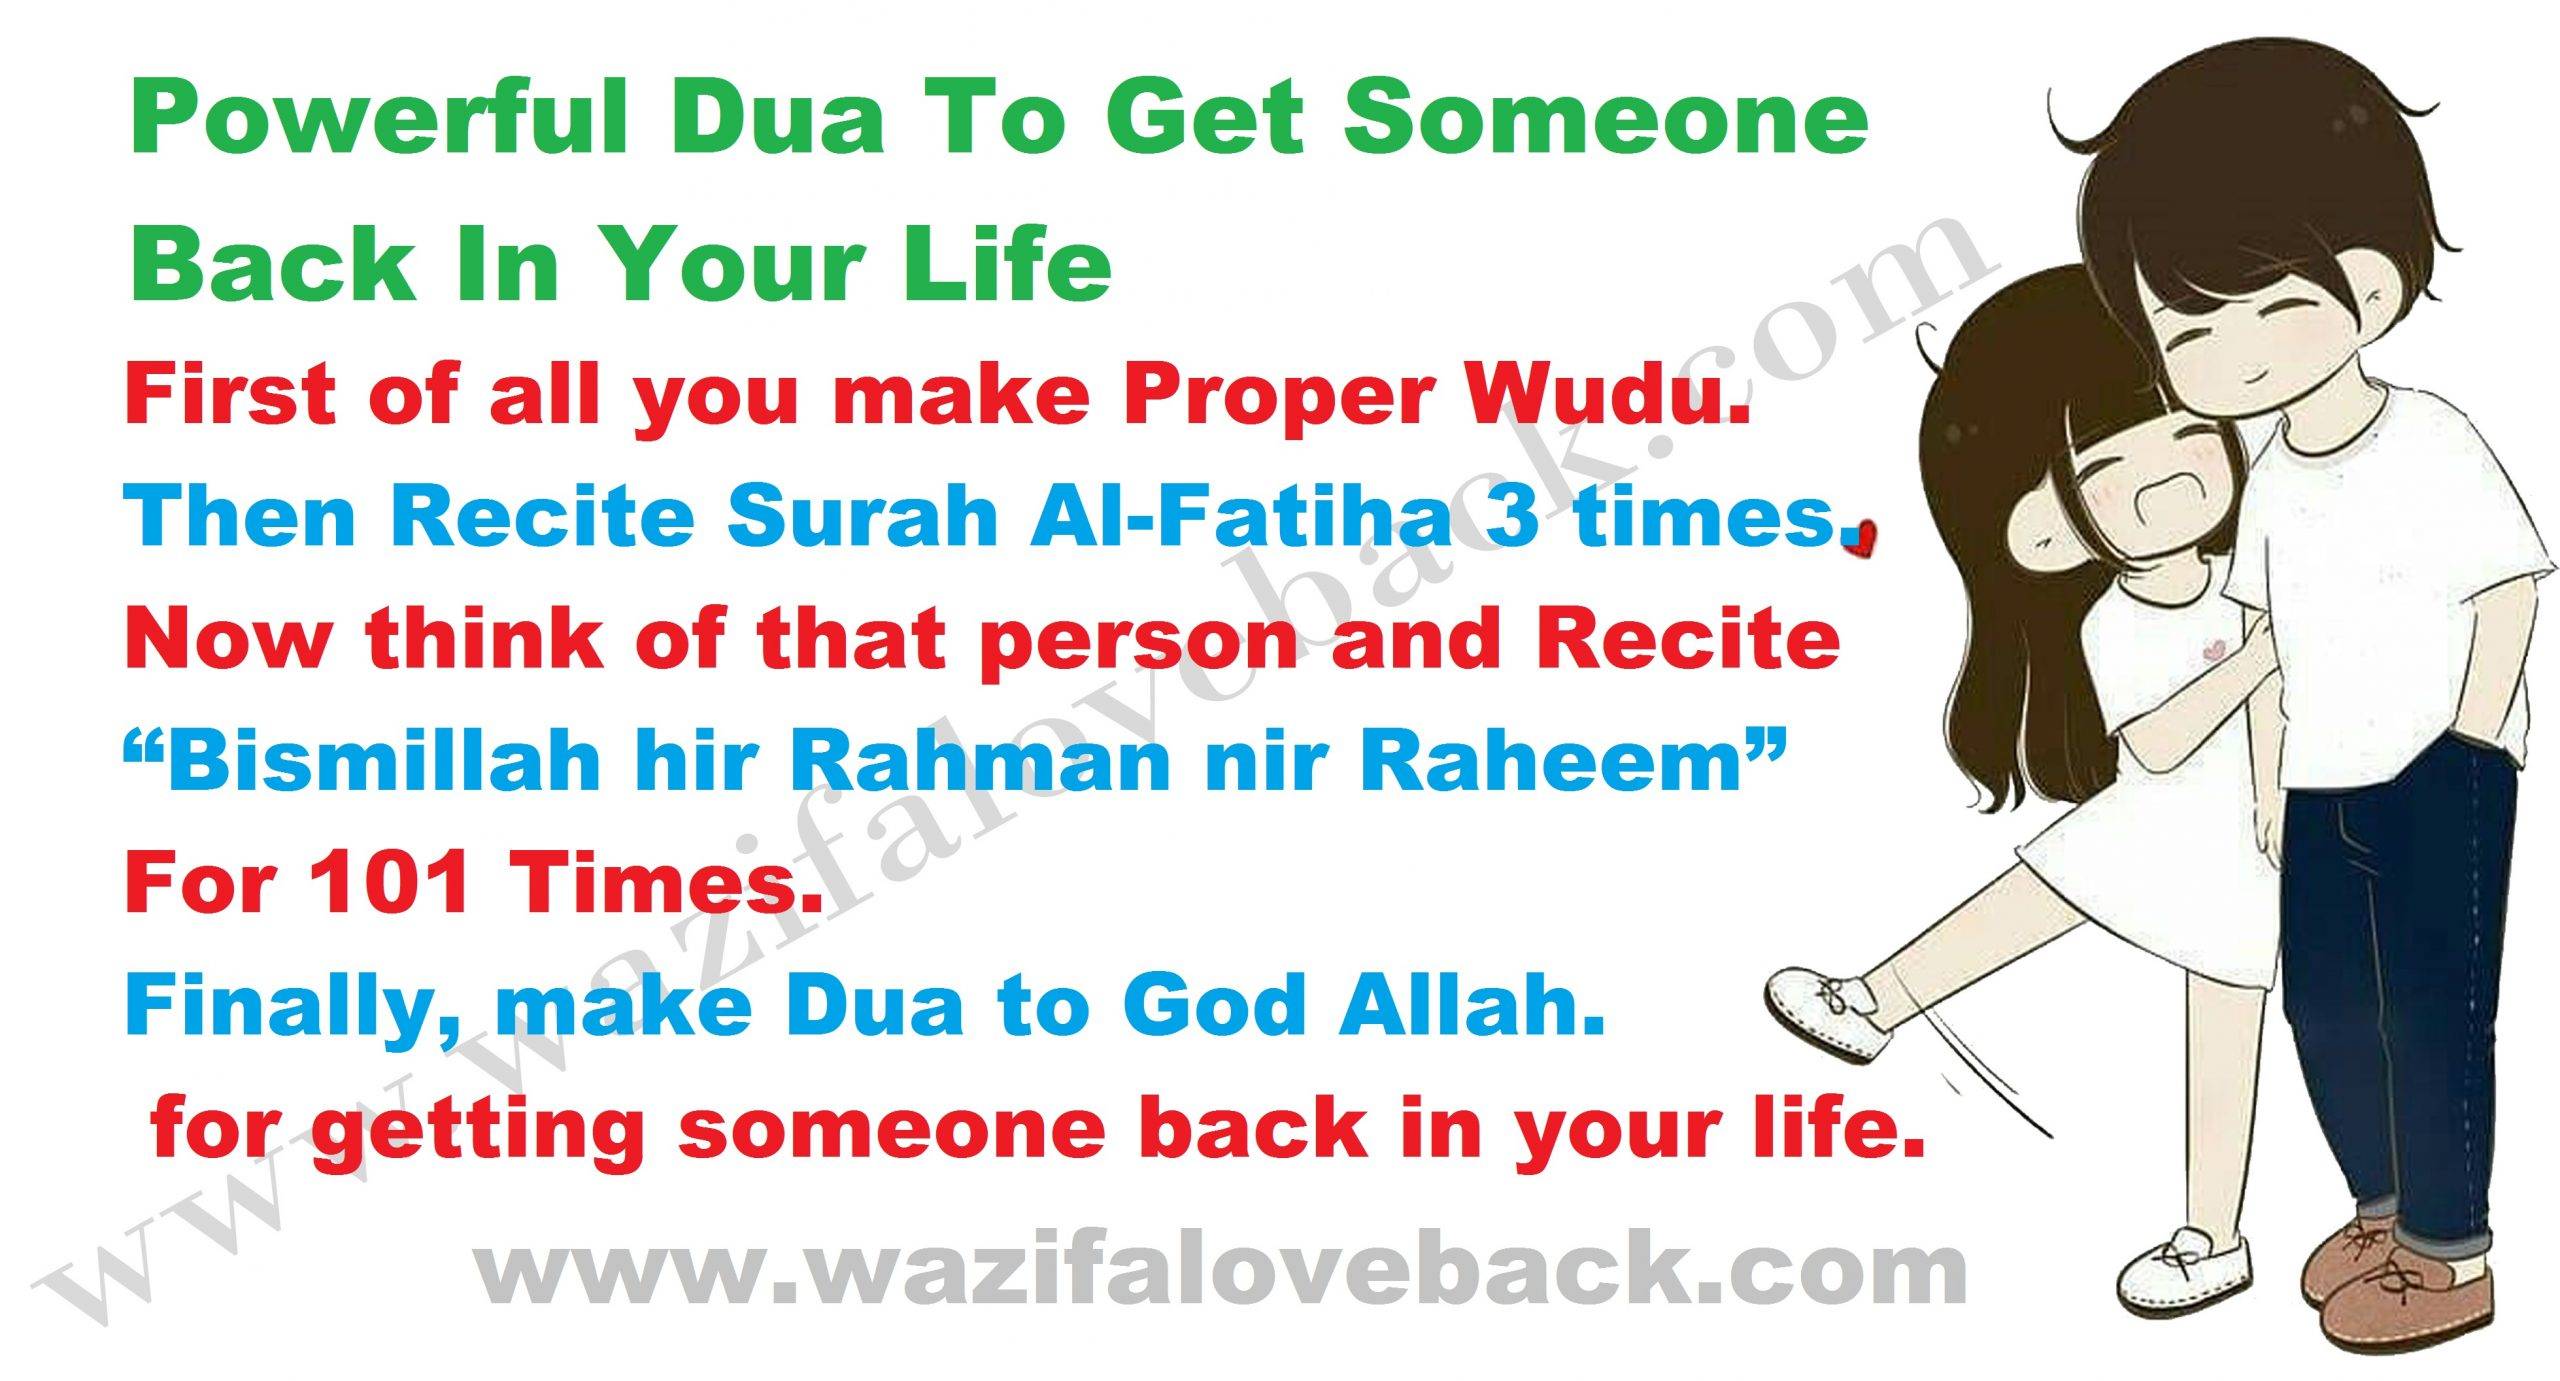 Powerful Dua To Get Someone Back In Your Life